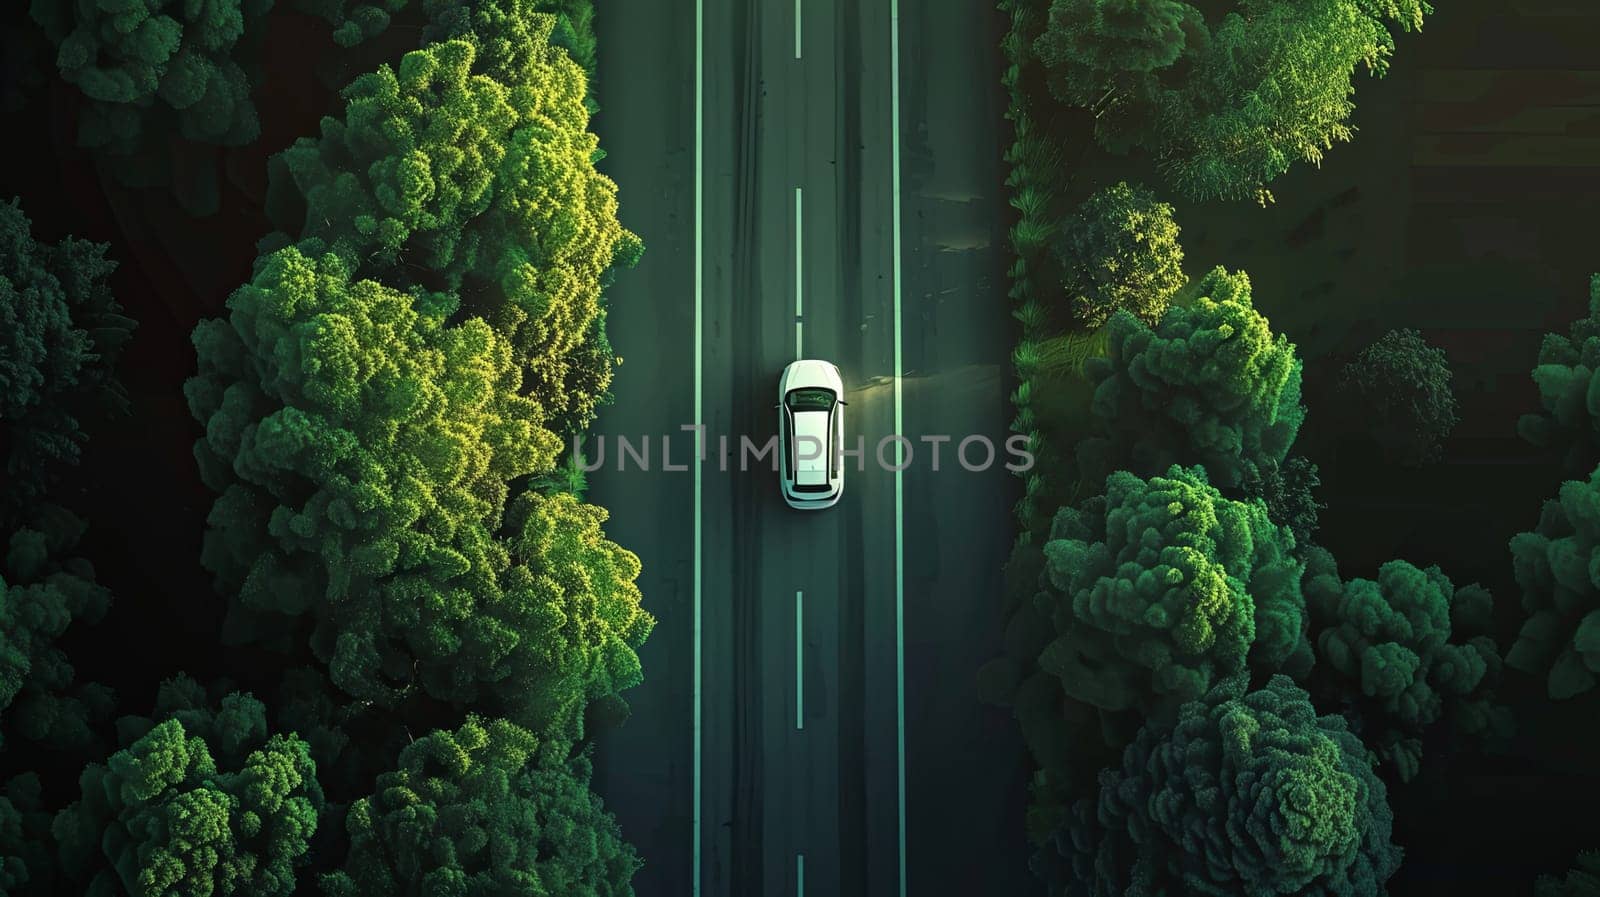 A car drives down a road surrounded by lush green trees in a forest.